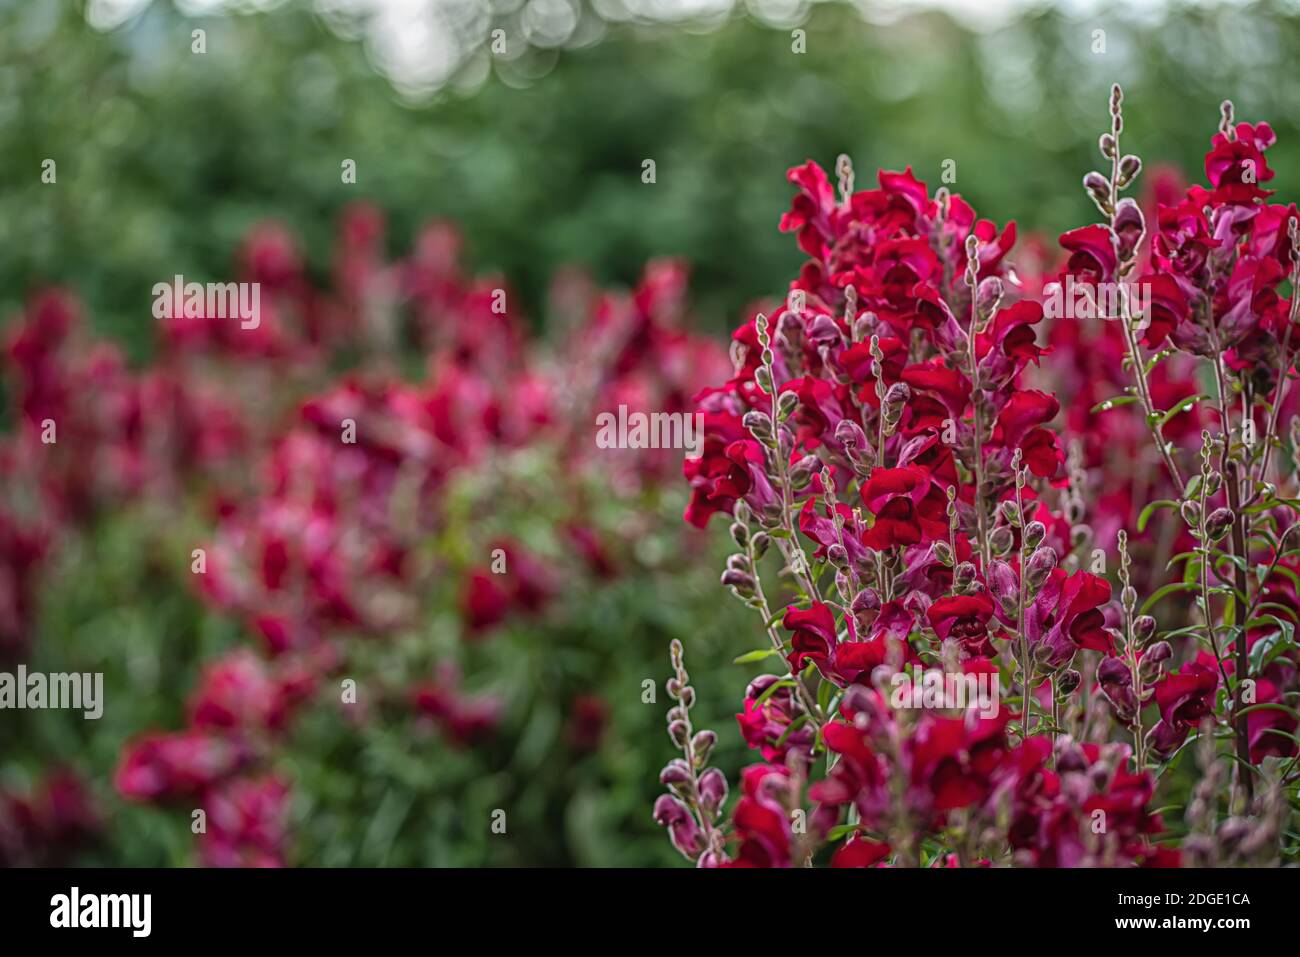 Purple flowers of antirrhinum or dragon flowers or snapdragons in a green flowers garden Stock Photo